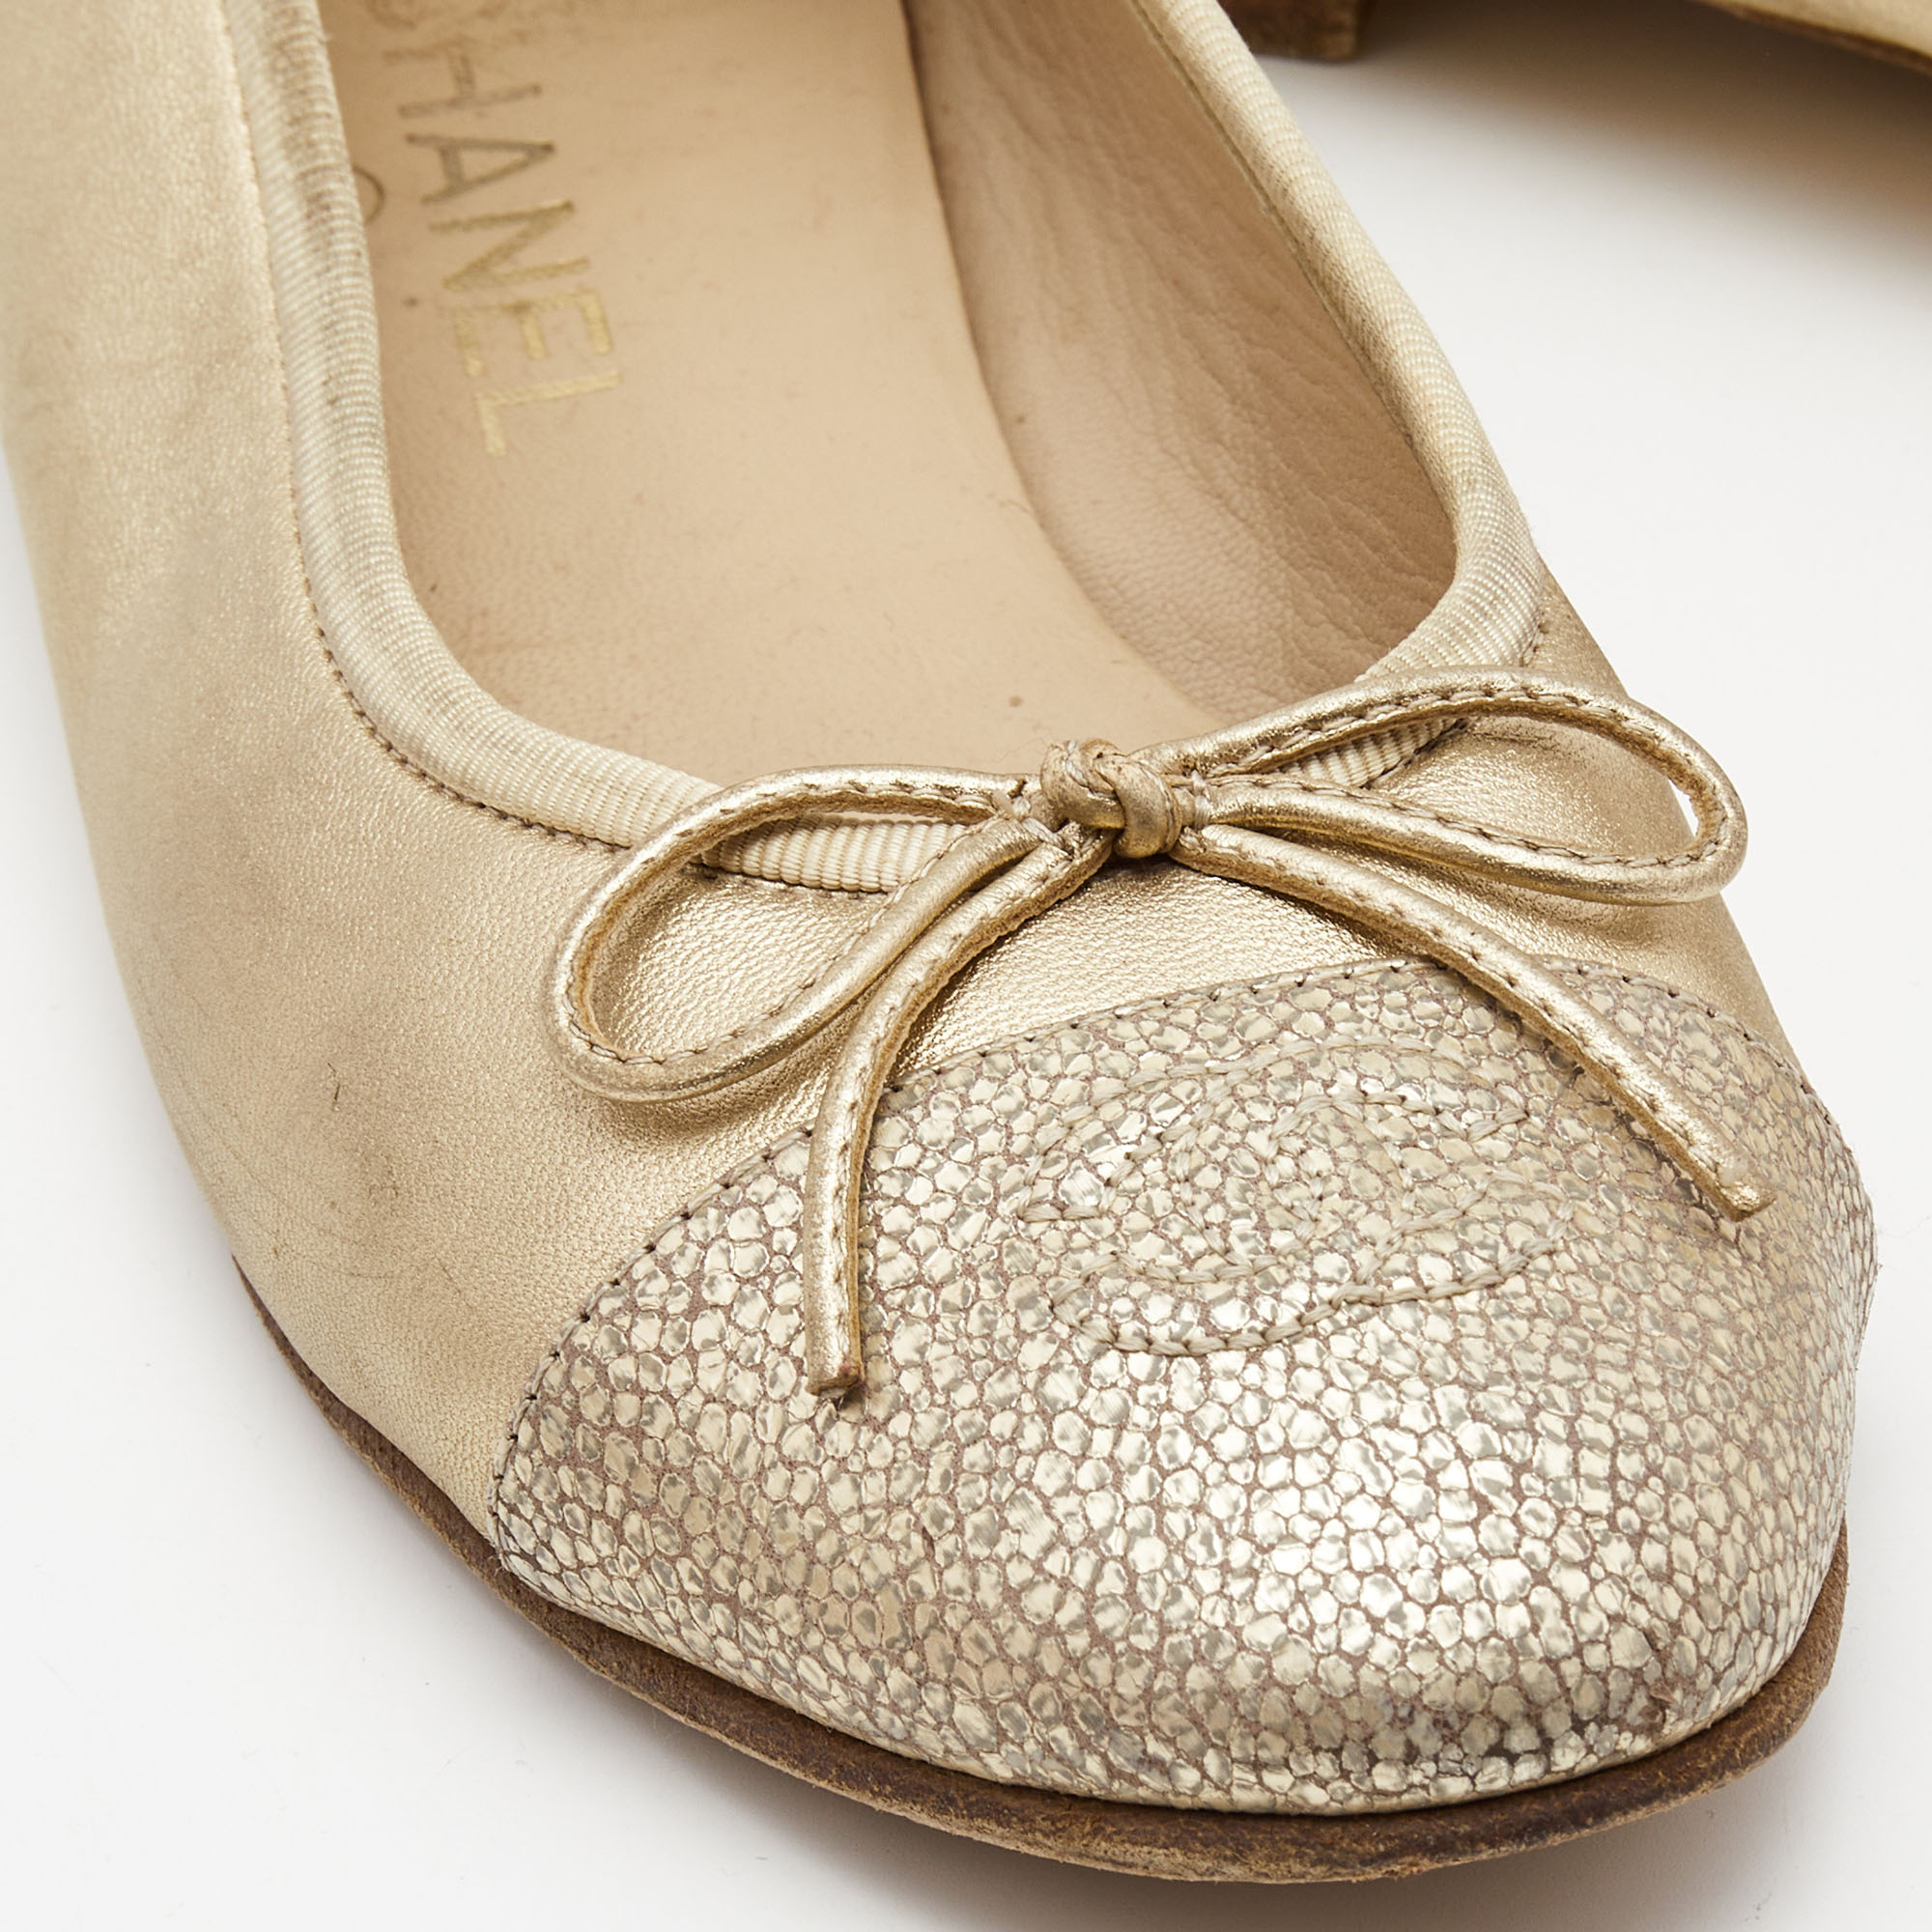 Chanel Gold Leather And Textured CC Cap Toe Bow Ballet Flats Size 37.5